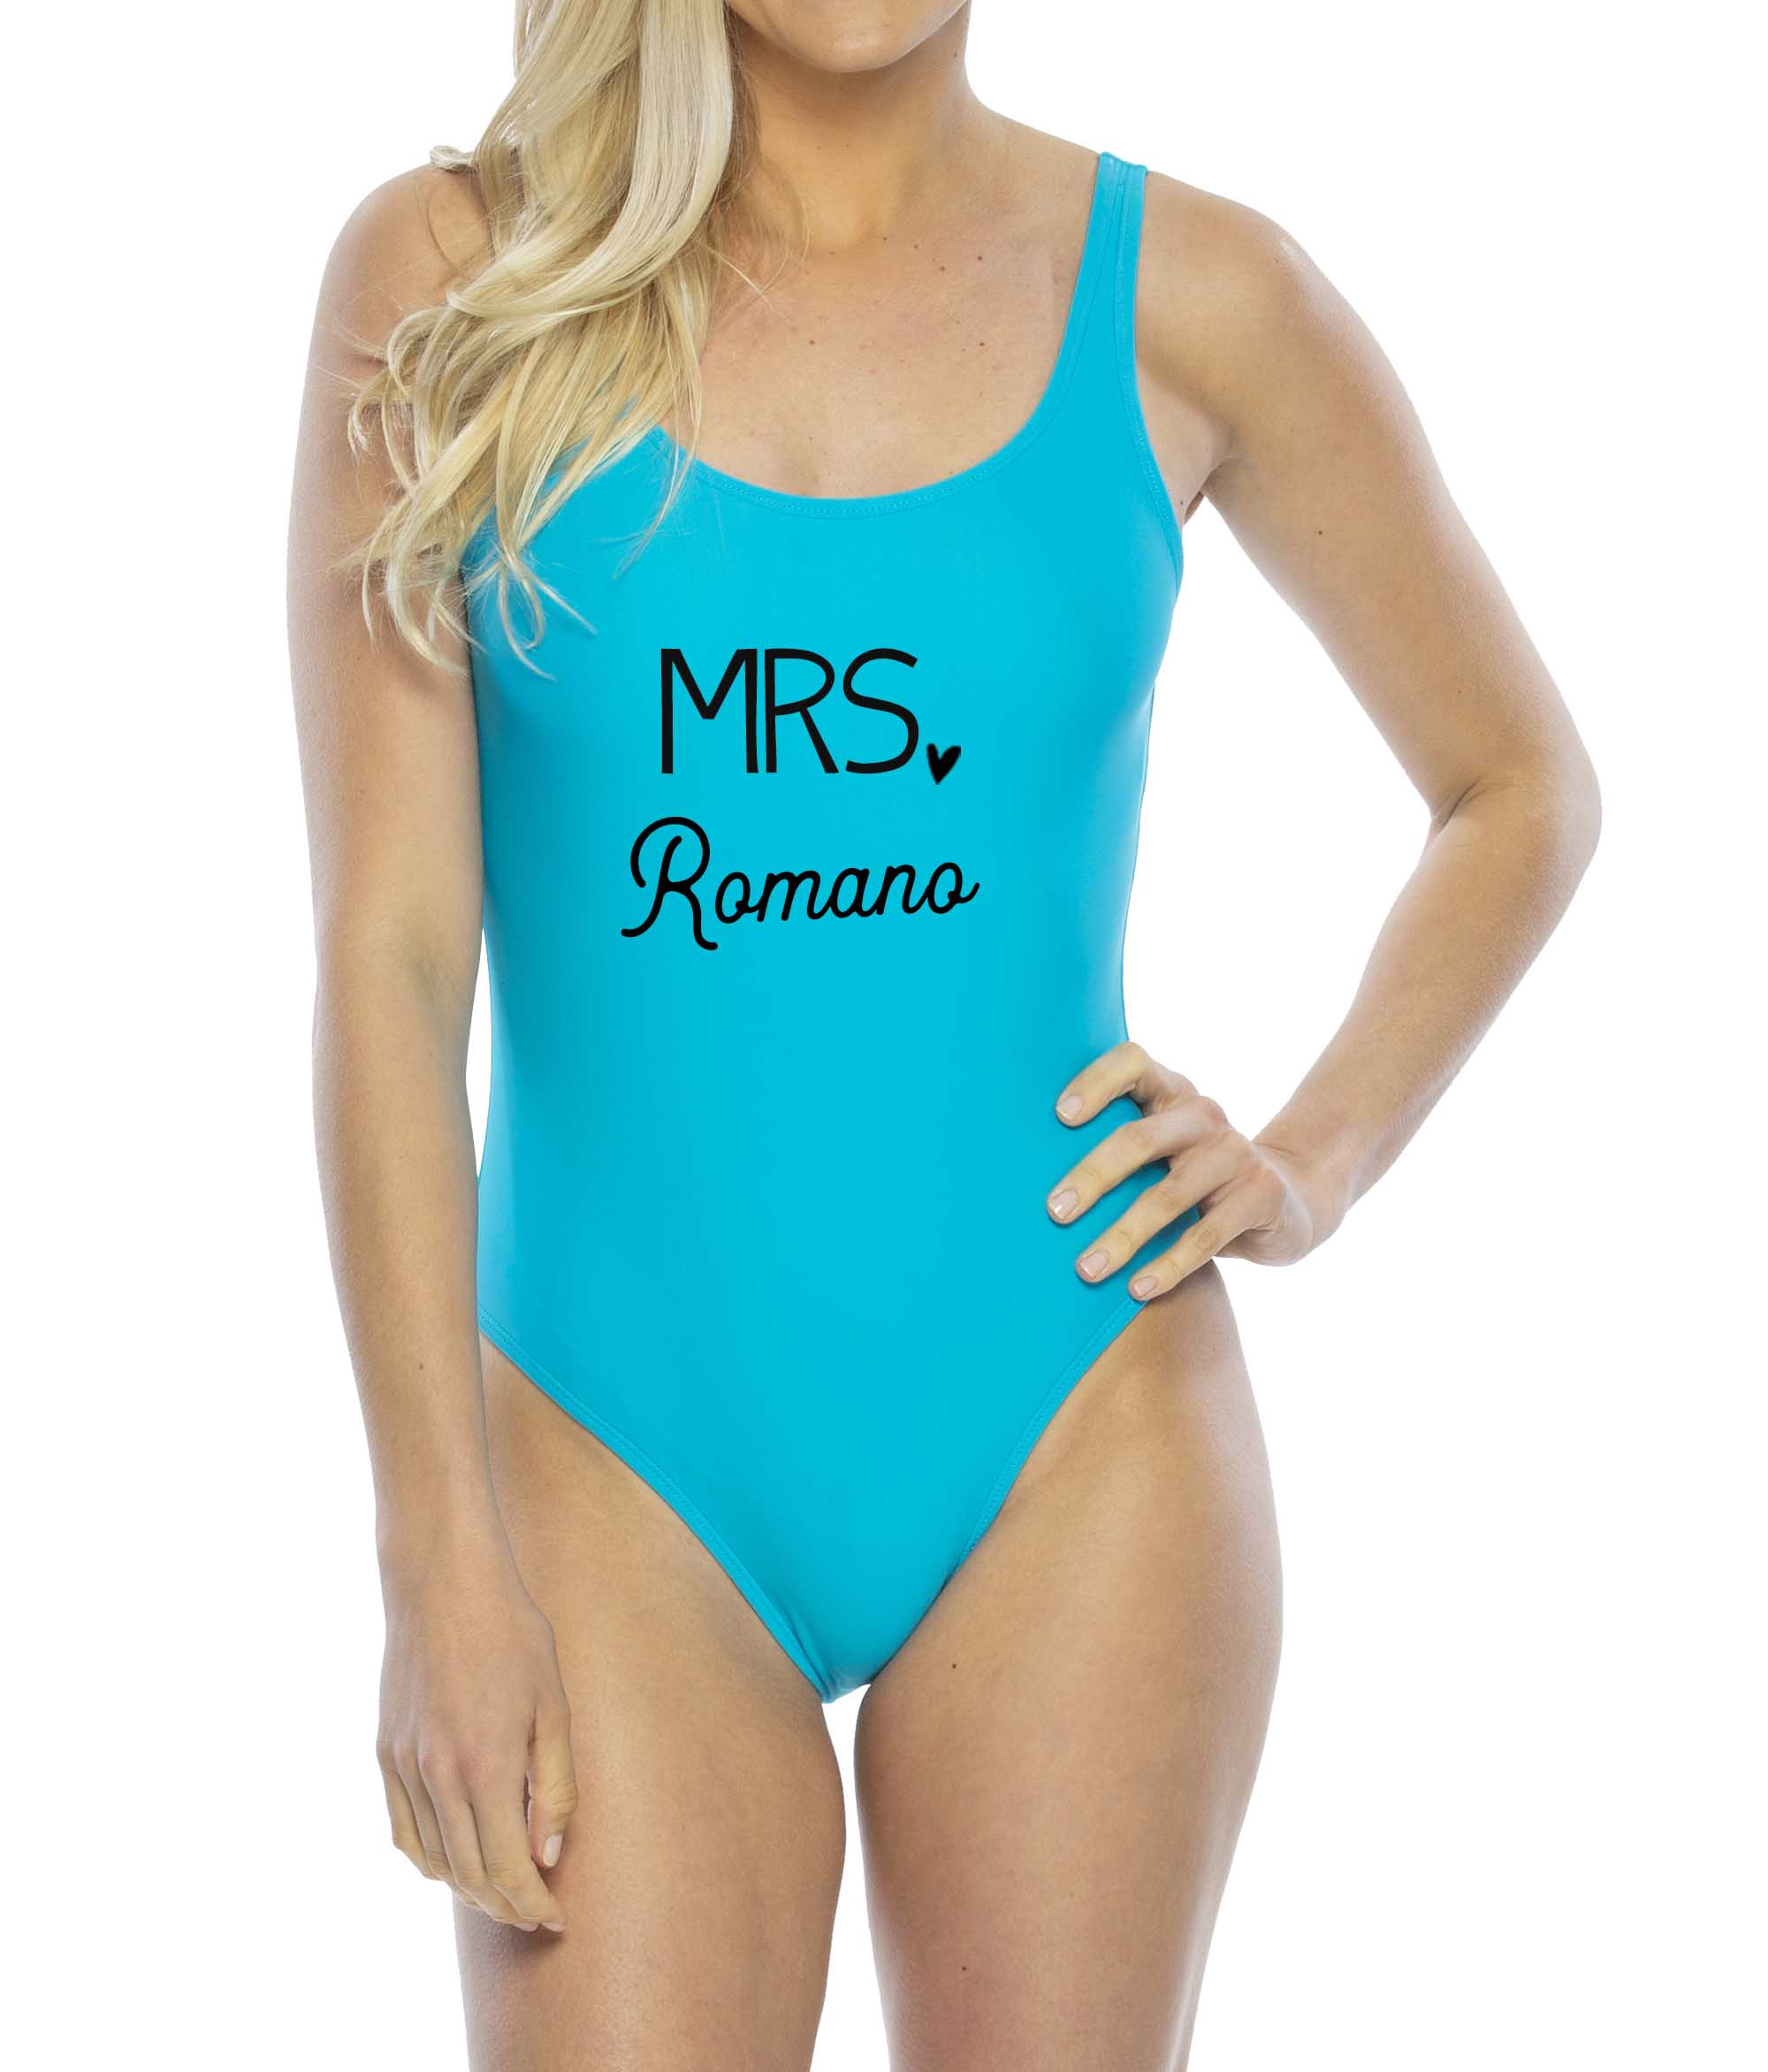 Personalized Swimsuit